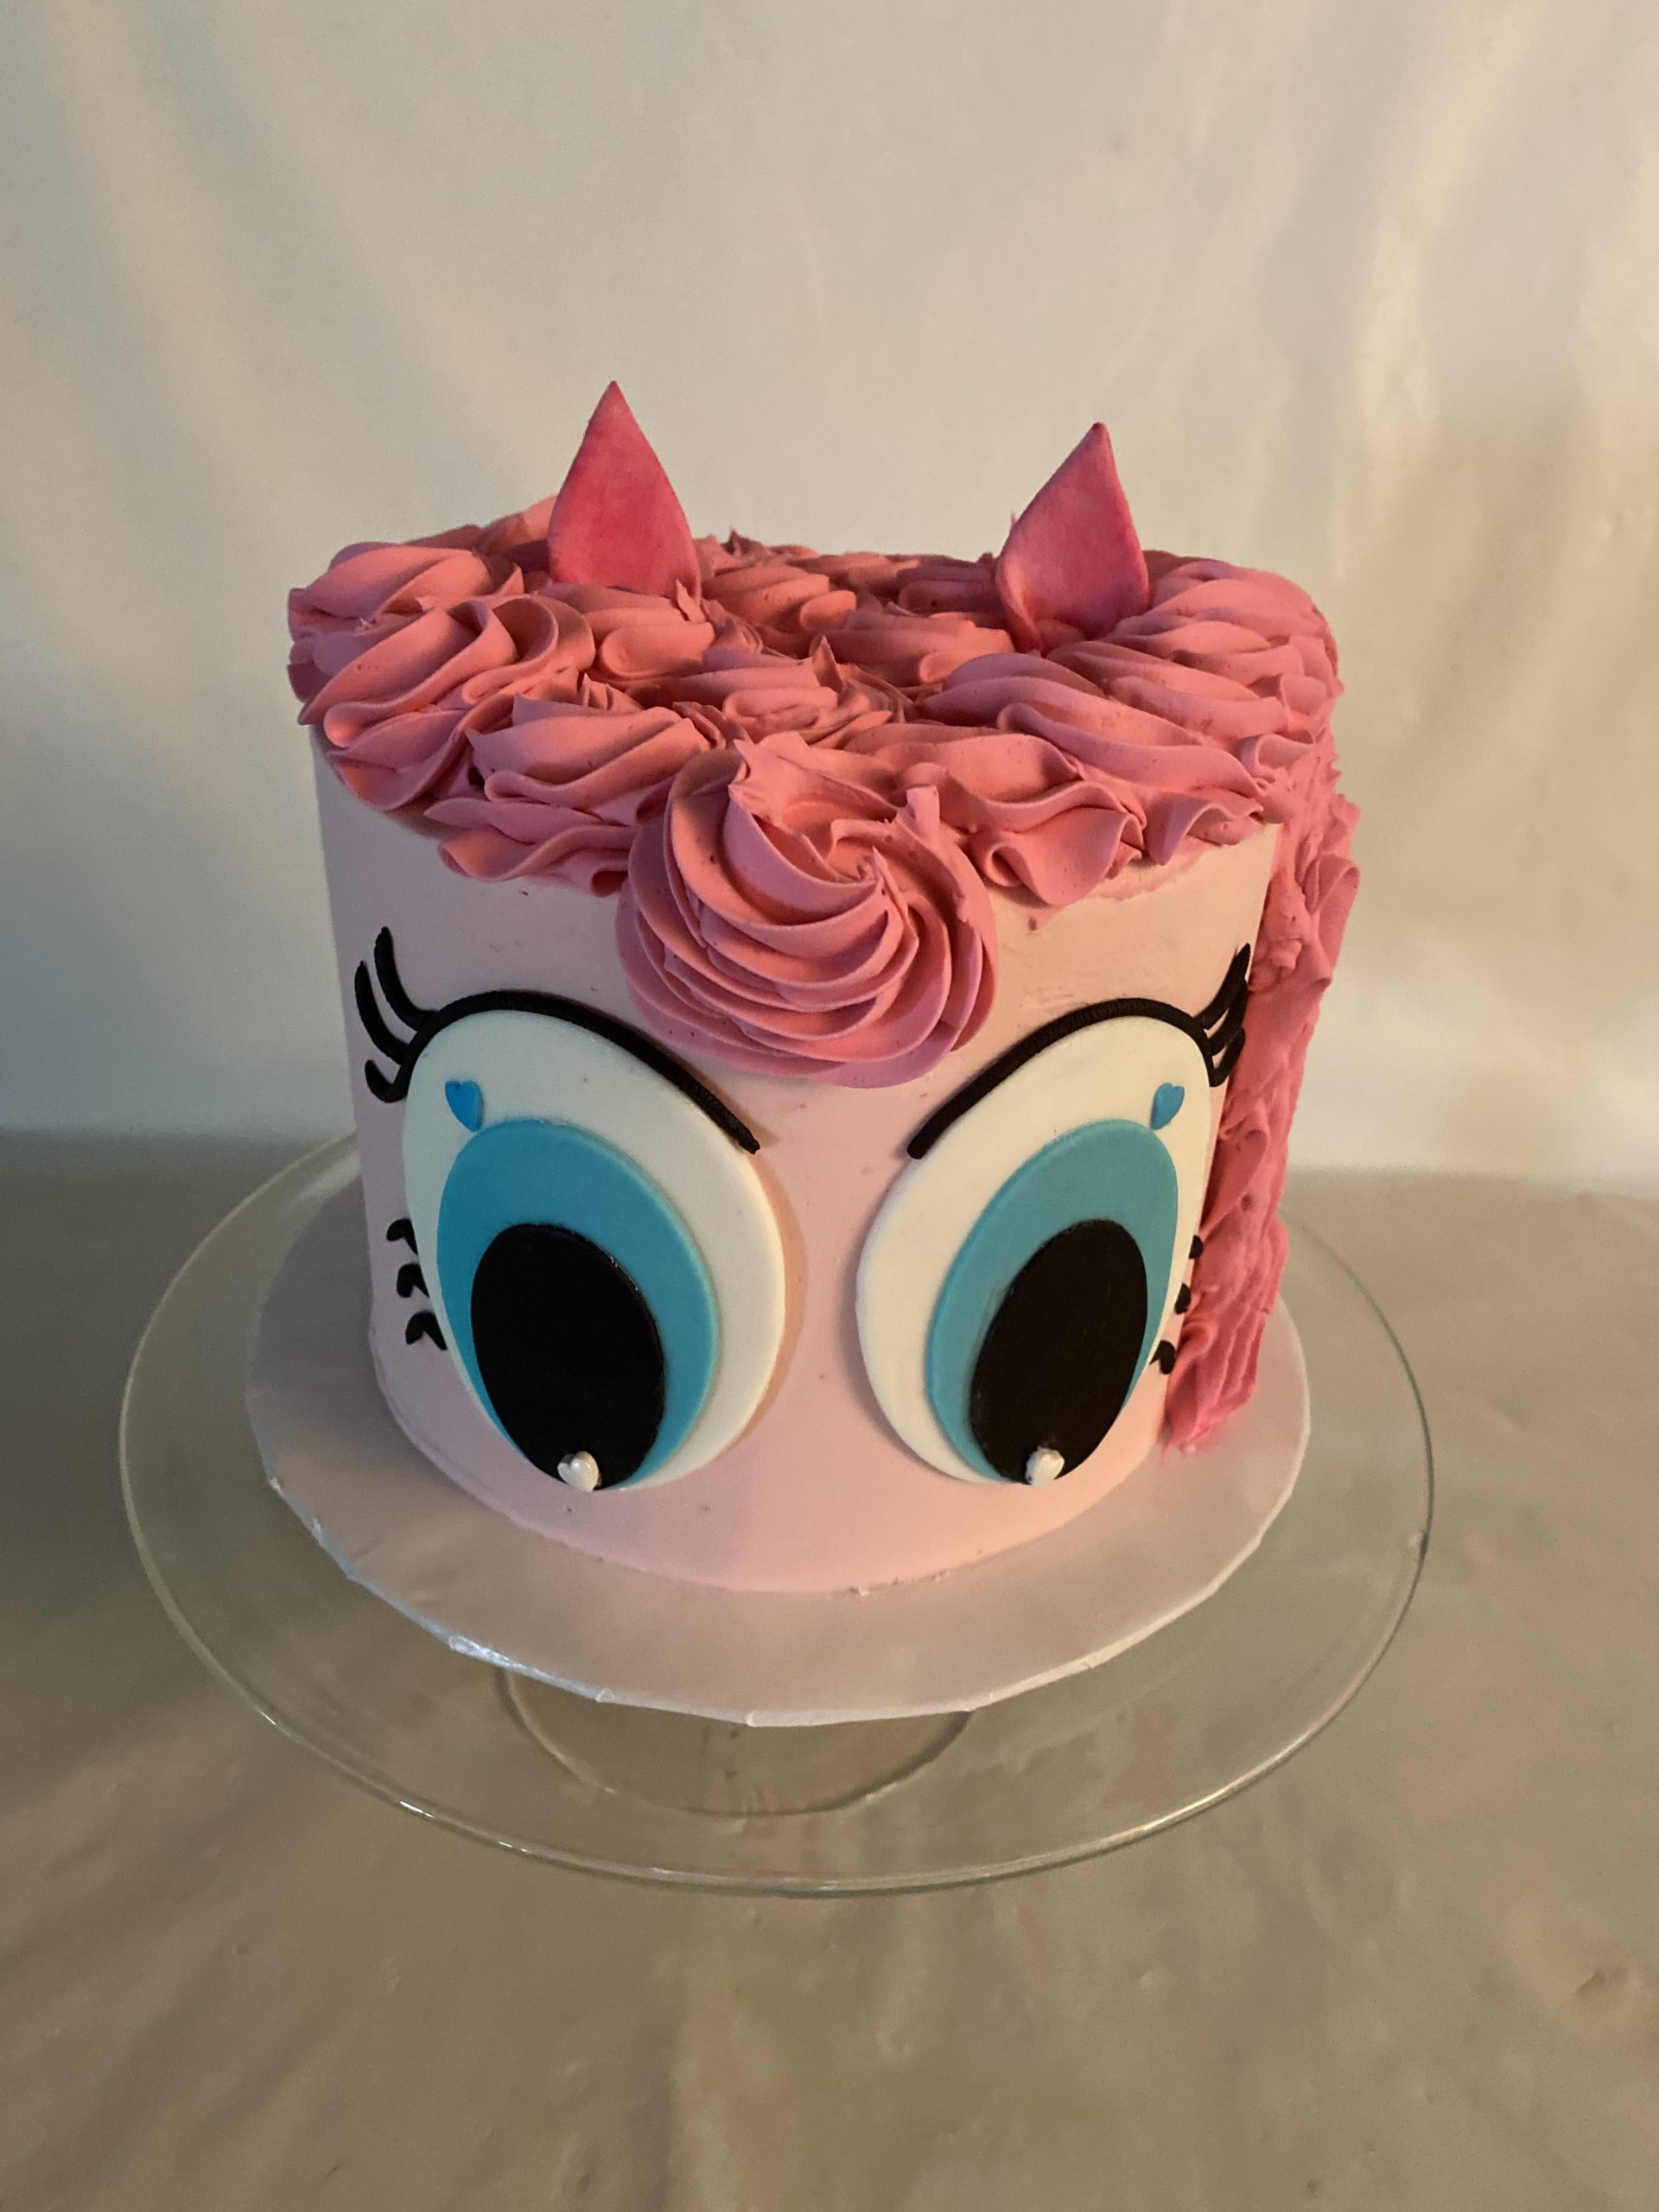 A custom children's birthday cake with hand-crafted fondant details from Village Patisserie in Toledo, Ohio